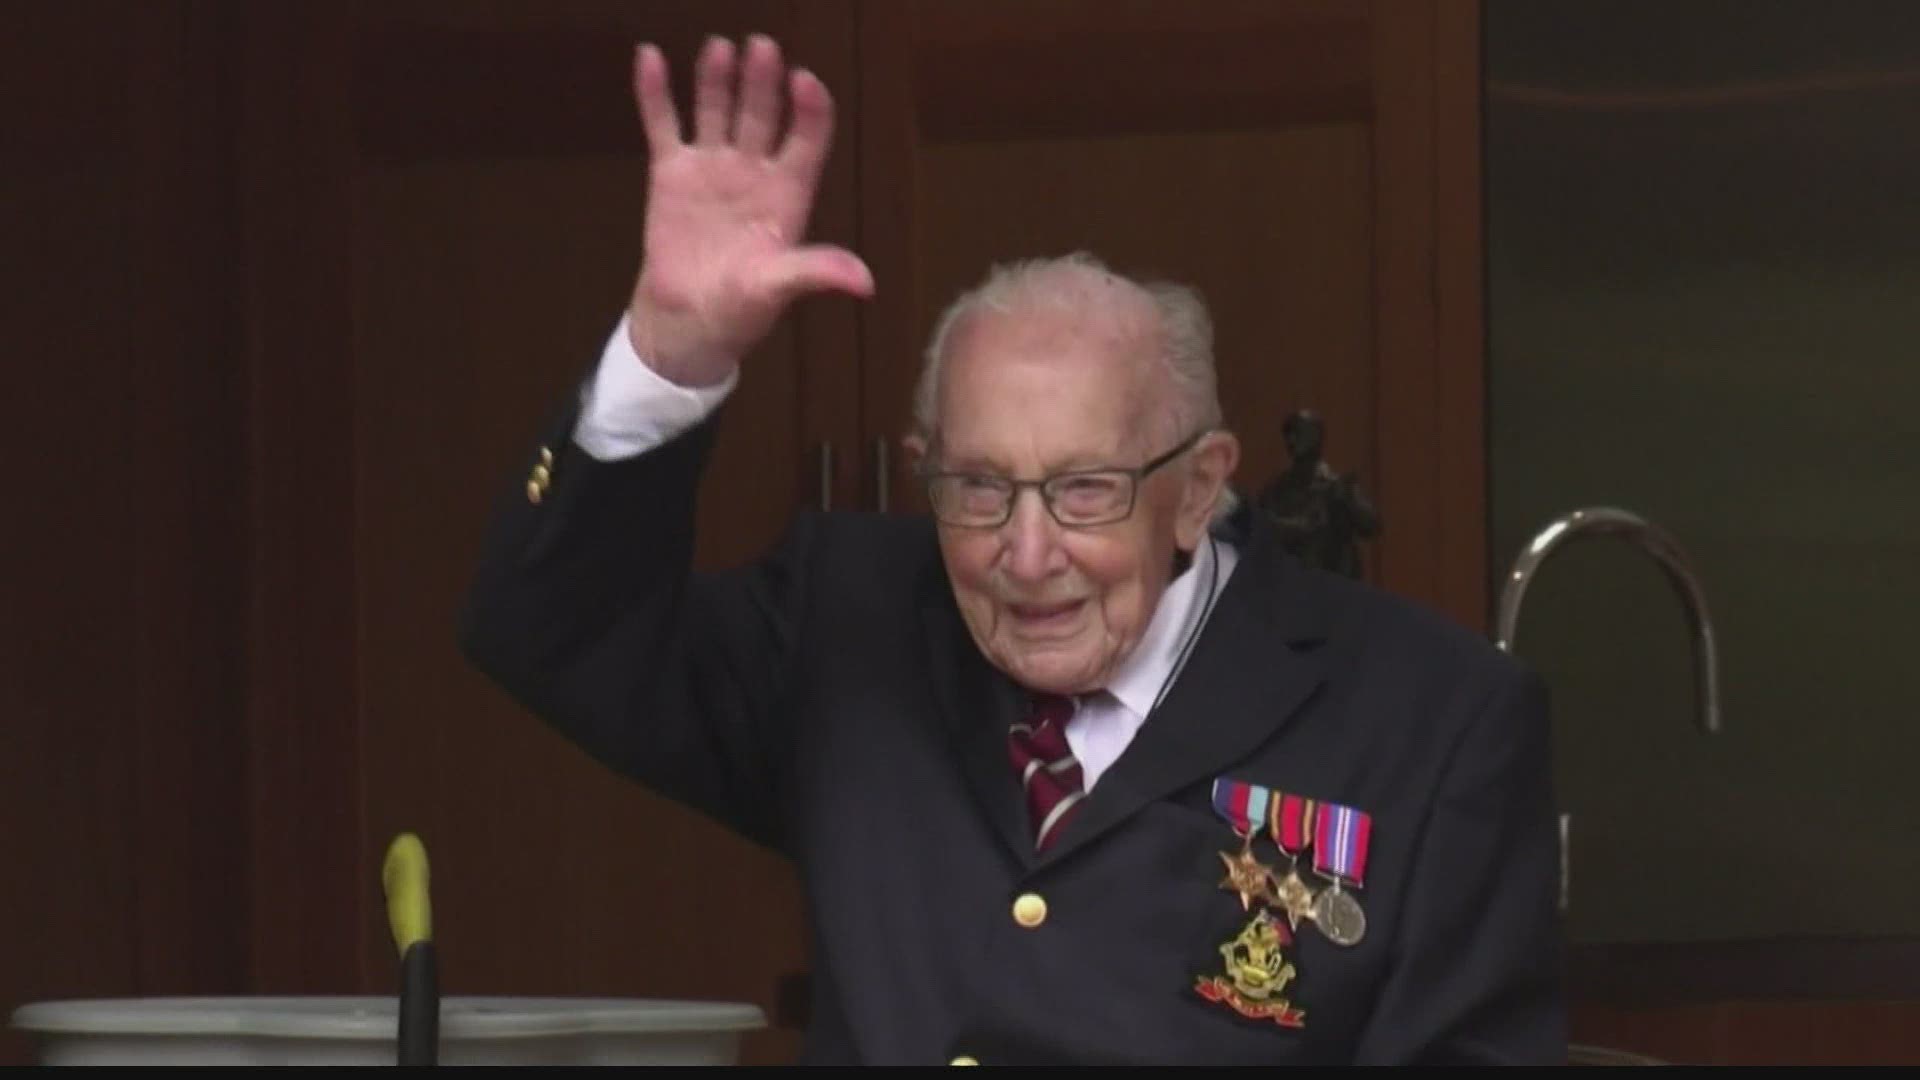 After he raised more than 30.6 million pounds ($38 million) for the National Health Service, Tom Moore has a very special 100th birthday.